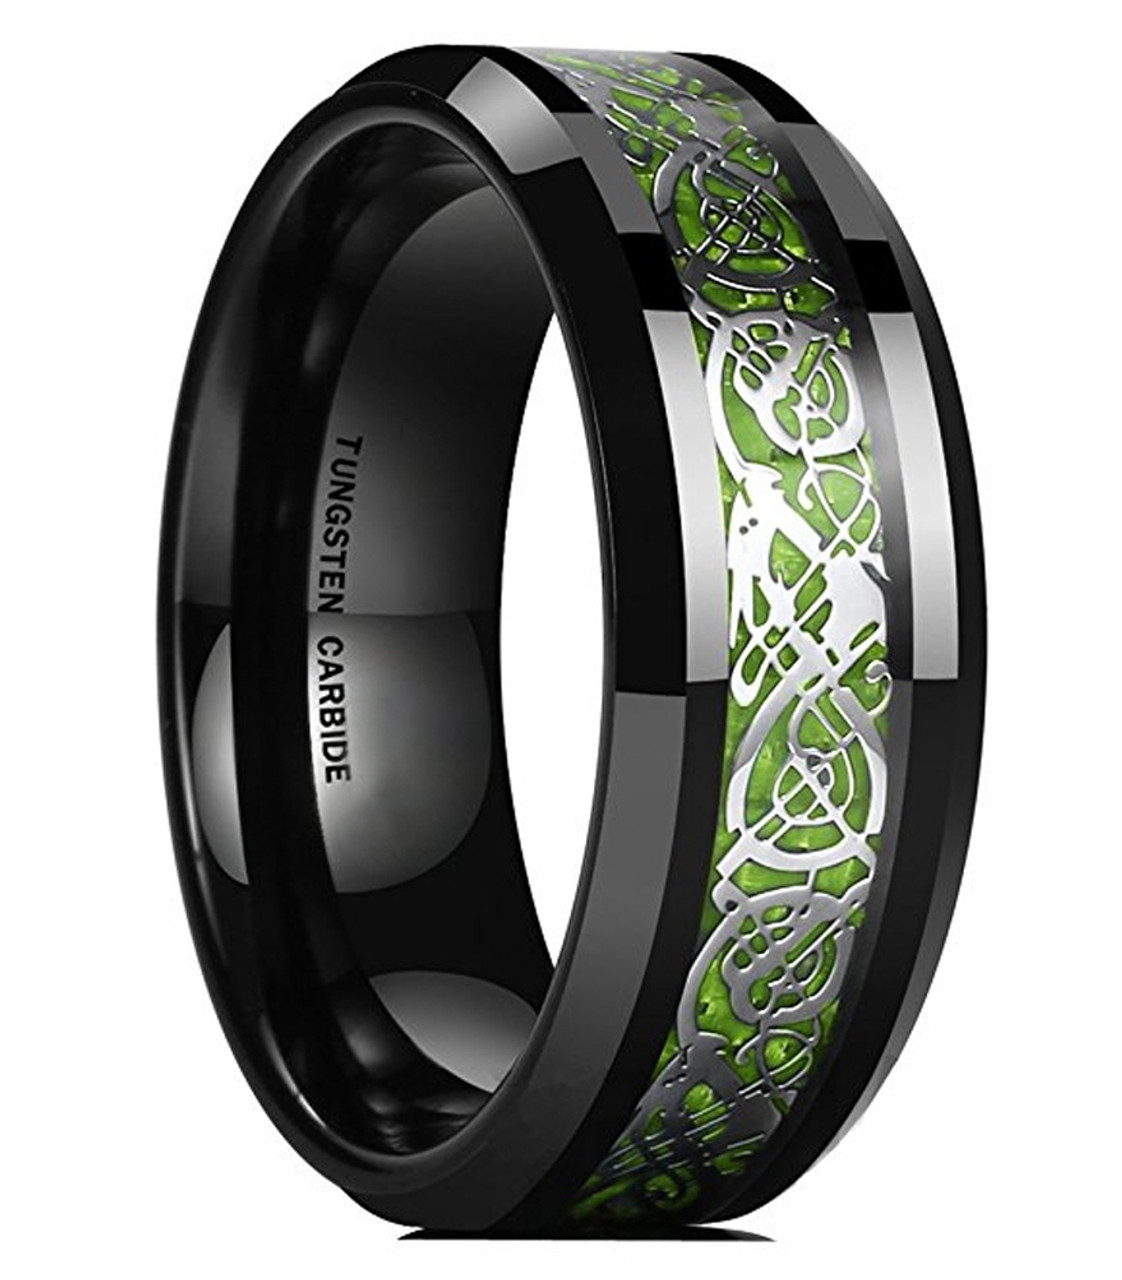 Unisex or Men's Tungsten Wedding Band (8mm). Celtic Wedding Band. Black Resin Inlay Silver and Bright Green Celtic Knot Ring